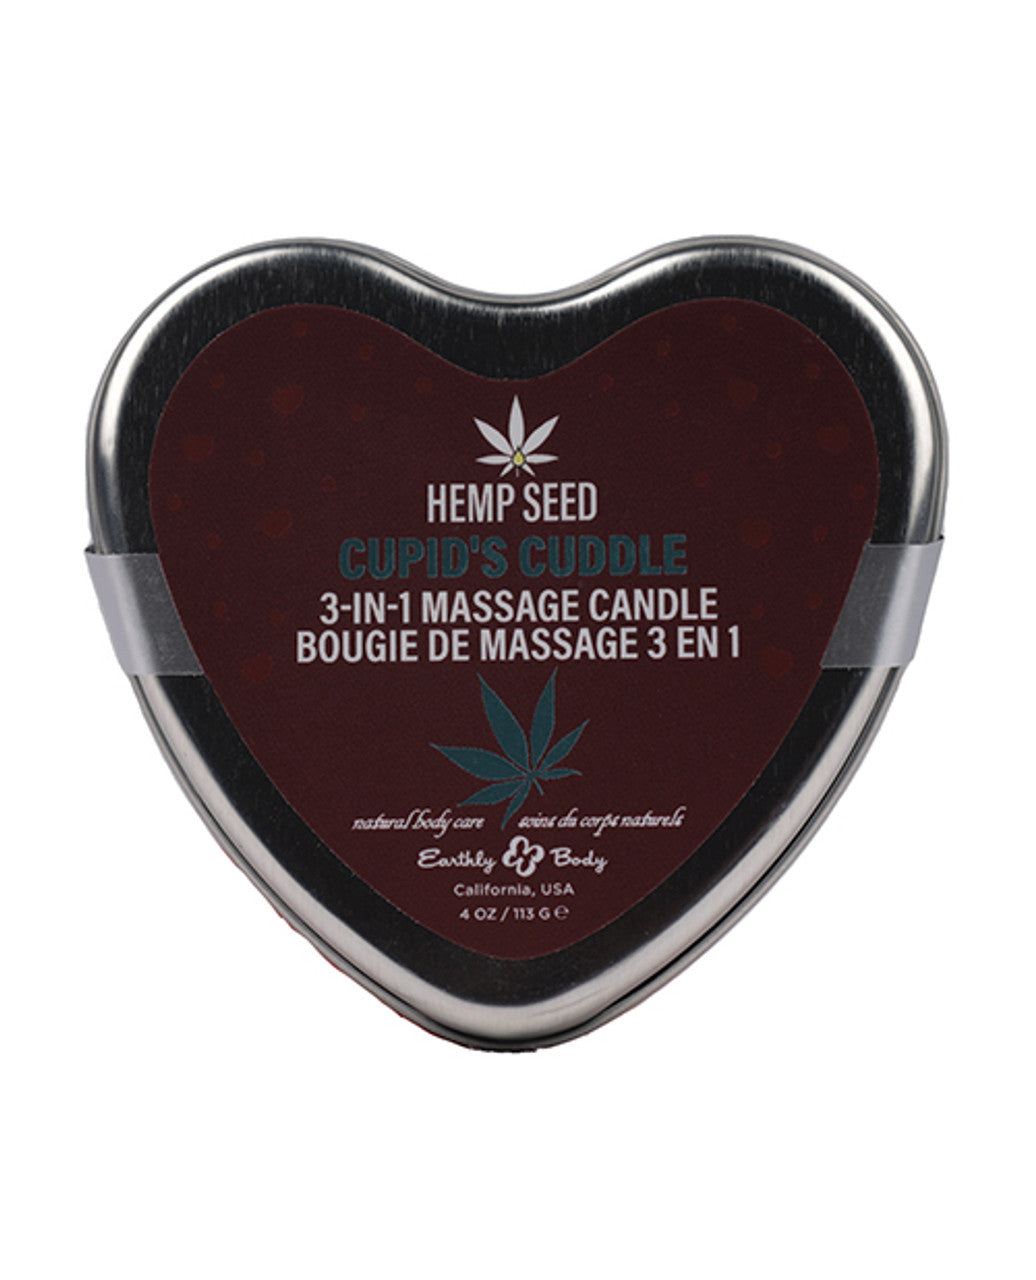 Hemp Seed 3-in-1 Valentines Day Candle - Cupid's Cuddle 4 Oz-1